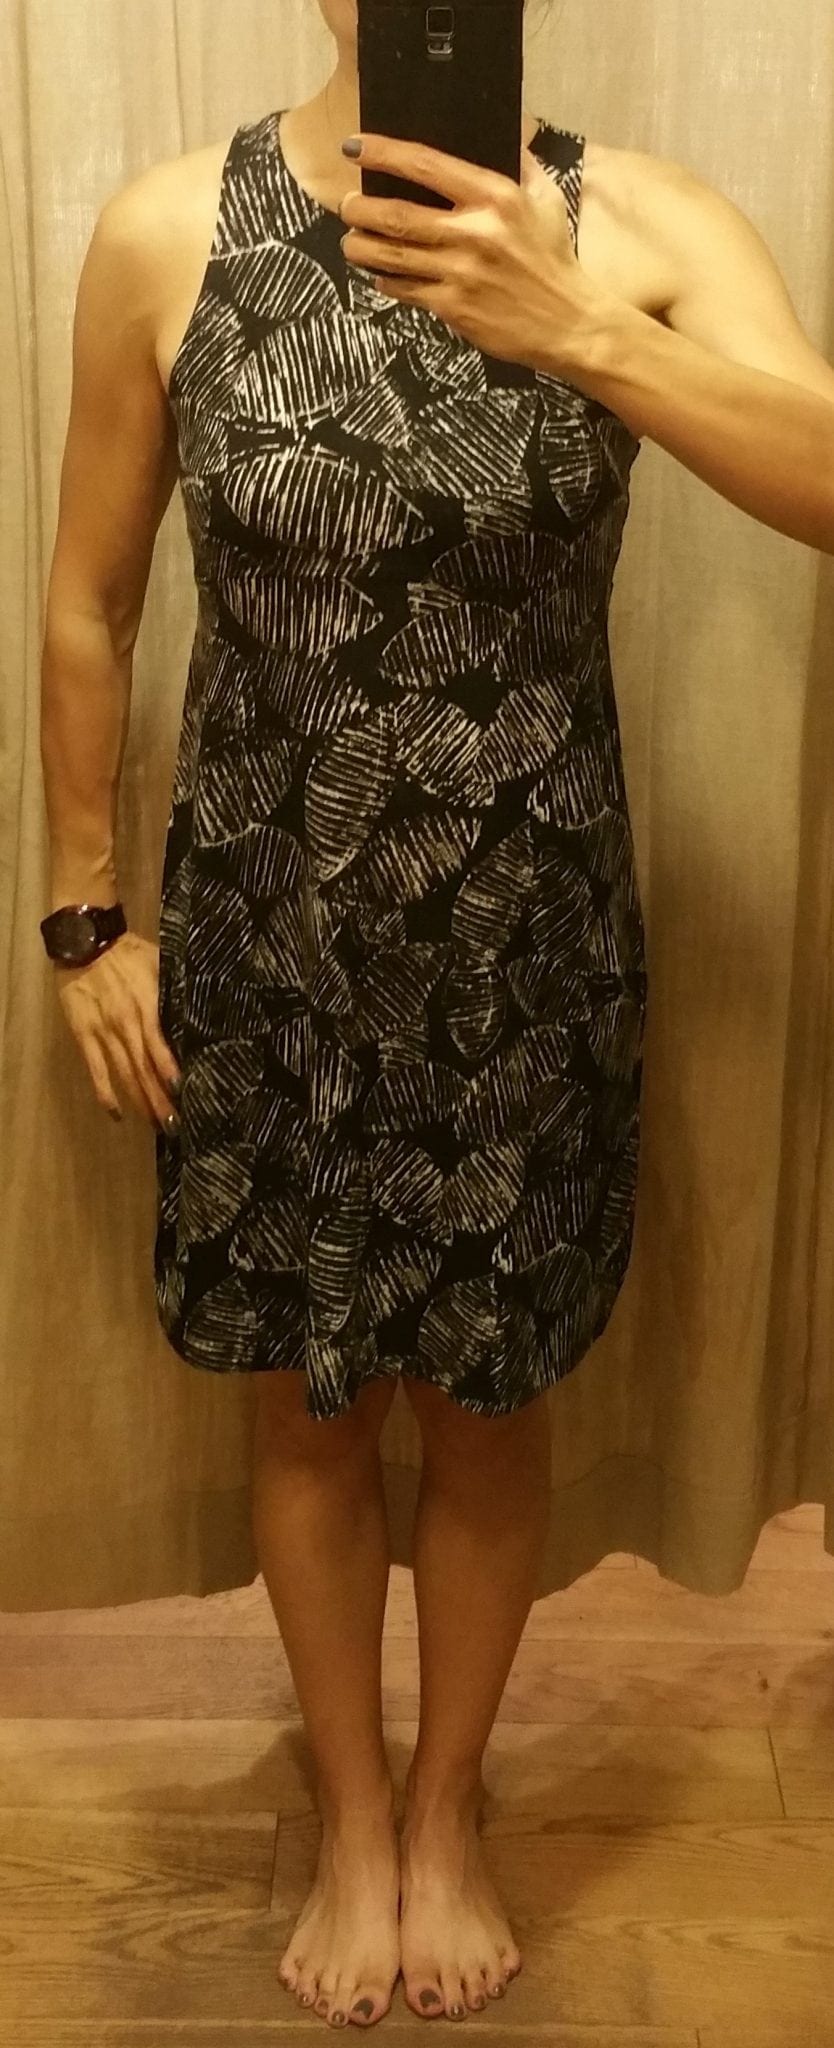 ATHLETA FIT REVIEW (Part 1): Santorini High Neck Printed Dress, Santorini  High Neck Mix Stripe Dress, Brookfield Dress, and Side Gather T-Shirt Dress  - The Sweat Edit